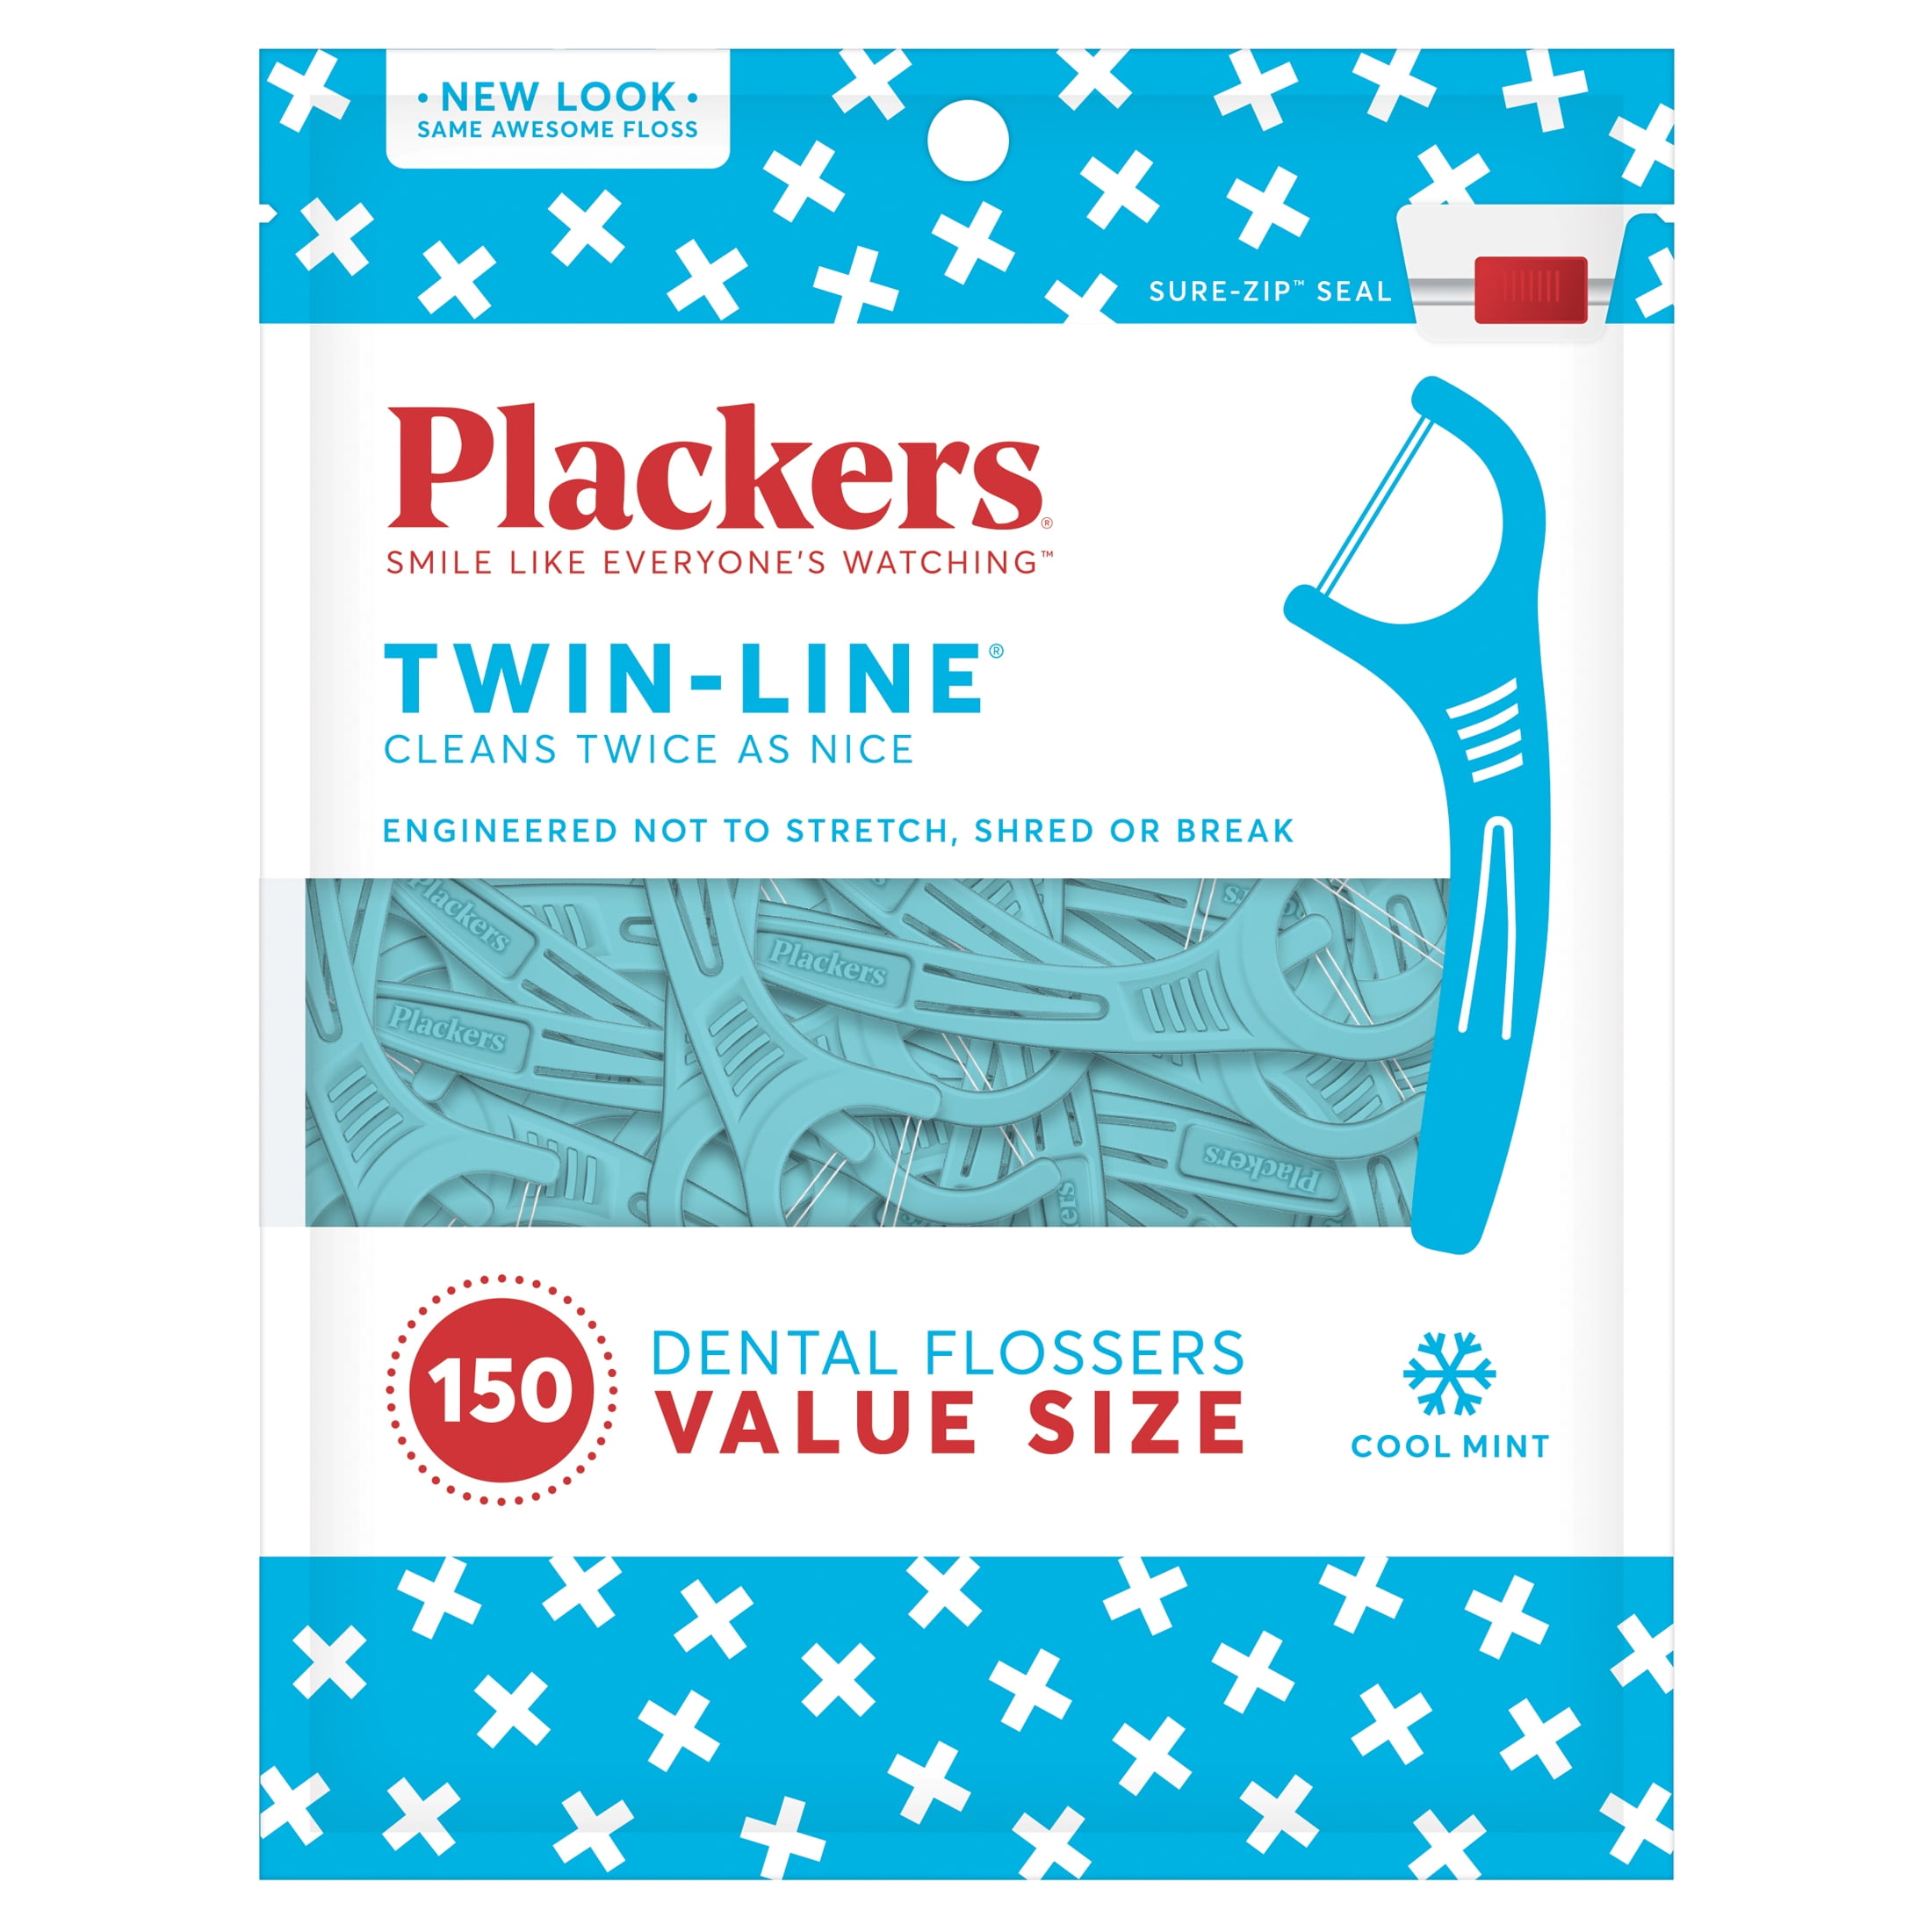 Plackers Twin-Line Dental Flossers, Dual Action Flossing System, Easy Storage, Super Tuffloss, 2X The Clean, Cool Mint Flavor,150 Count